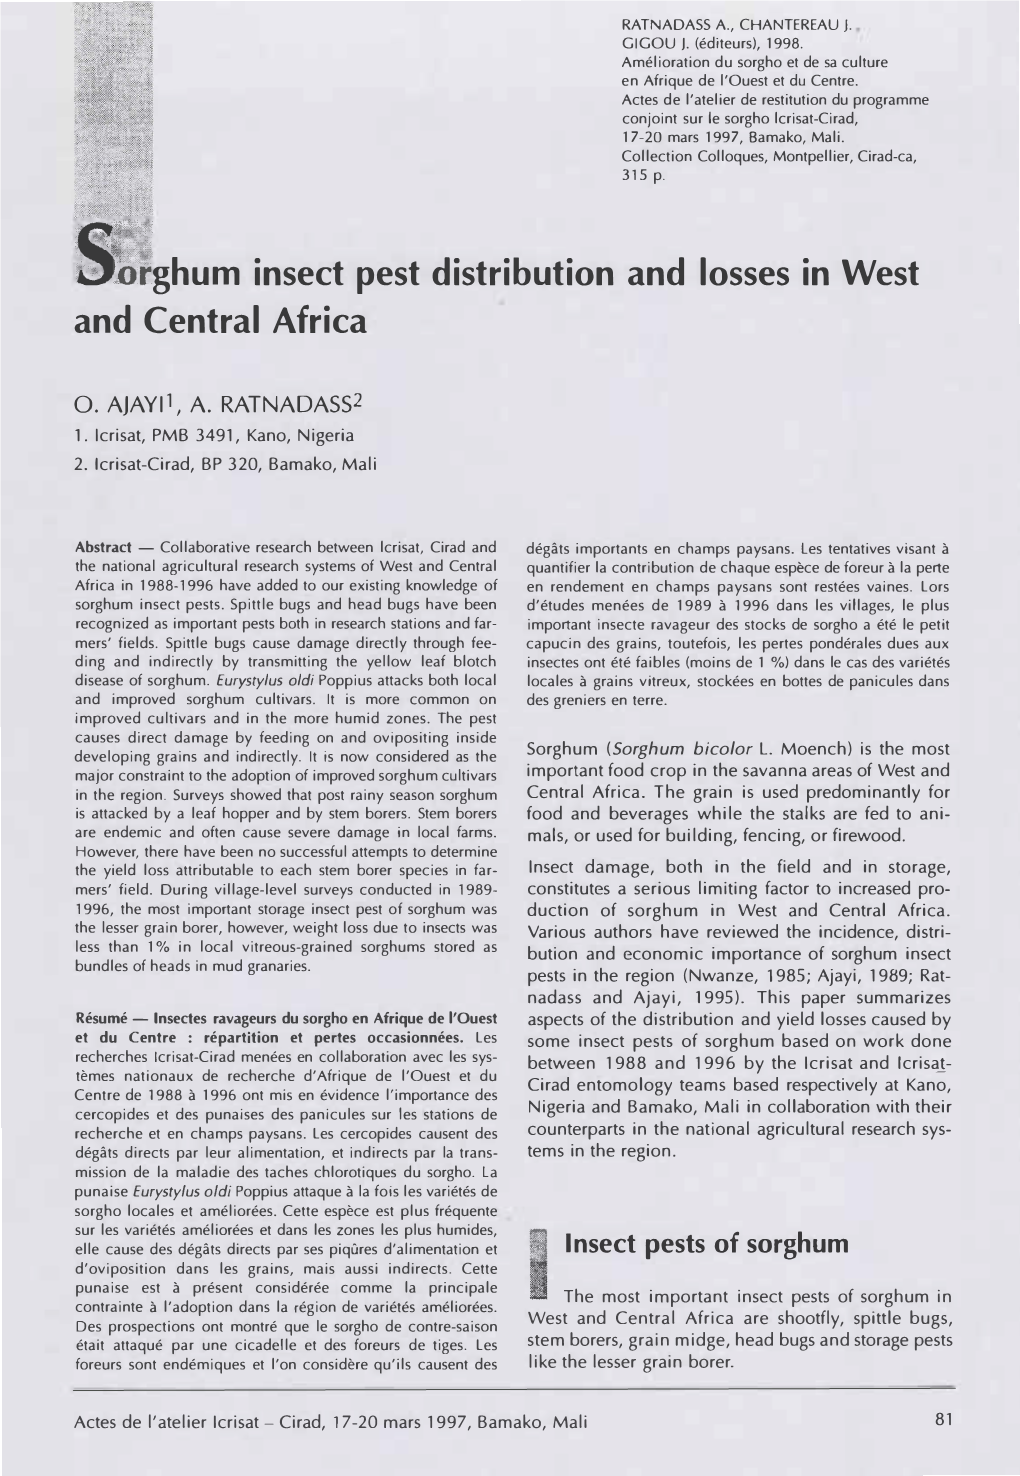 S.Ôfighum Insect Pest Distribution and Losses in West and Central Africa